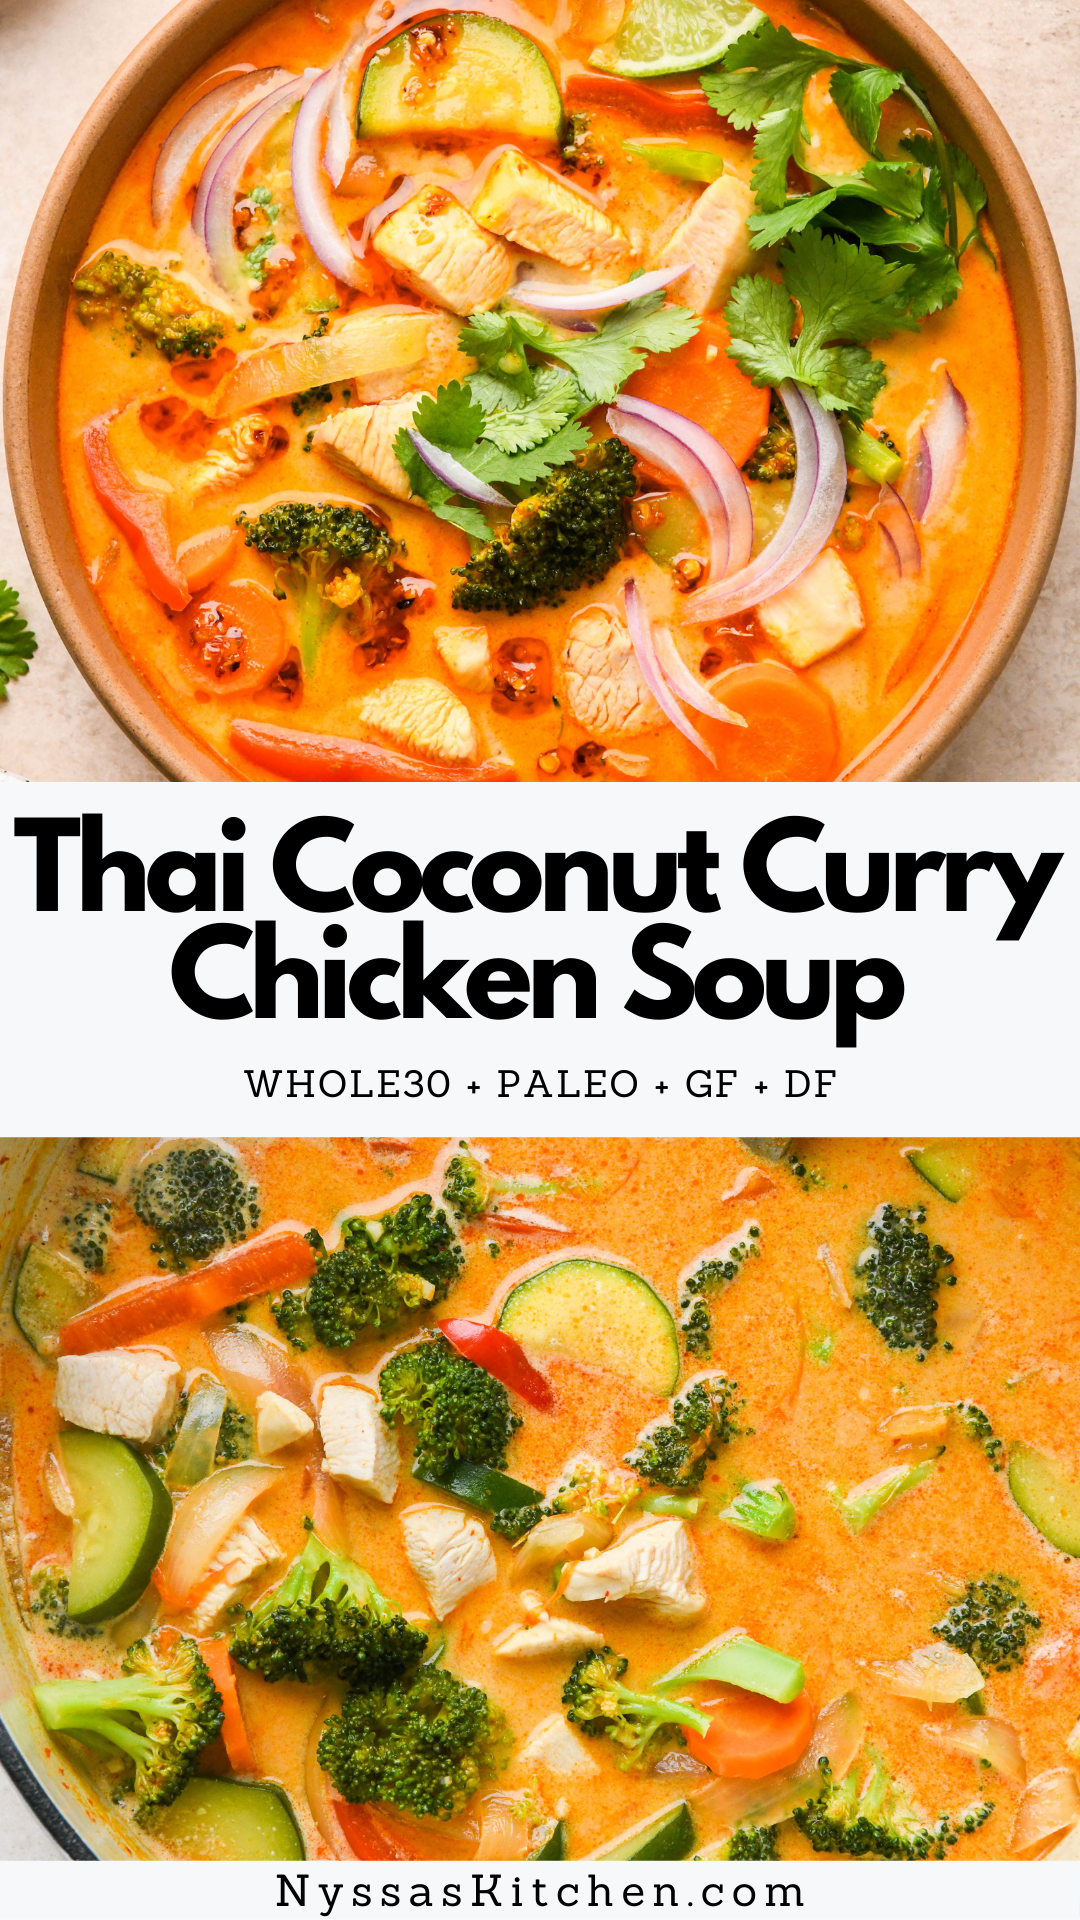 One of the best ways to warm up is with a hot bowl of Thai coconut curry chicken soup! Made with good for you ingredients like chicken breast, a wide variety of colorful vegetables, garlic, ginger, red (or green!) curry paste, and fresh lime juice. An easy to make dinner that is so good! Whole30, paleo friendly, gluten free, dairy free, vegan option.